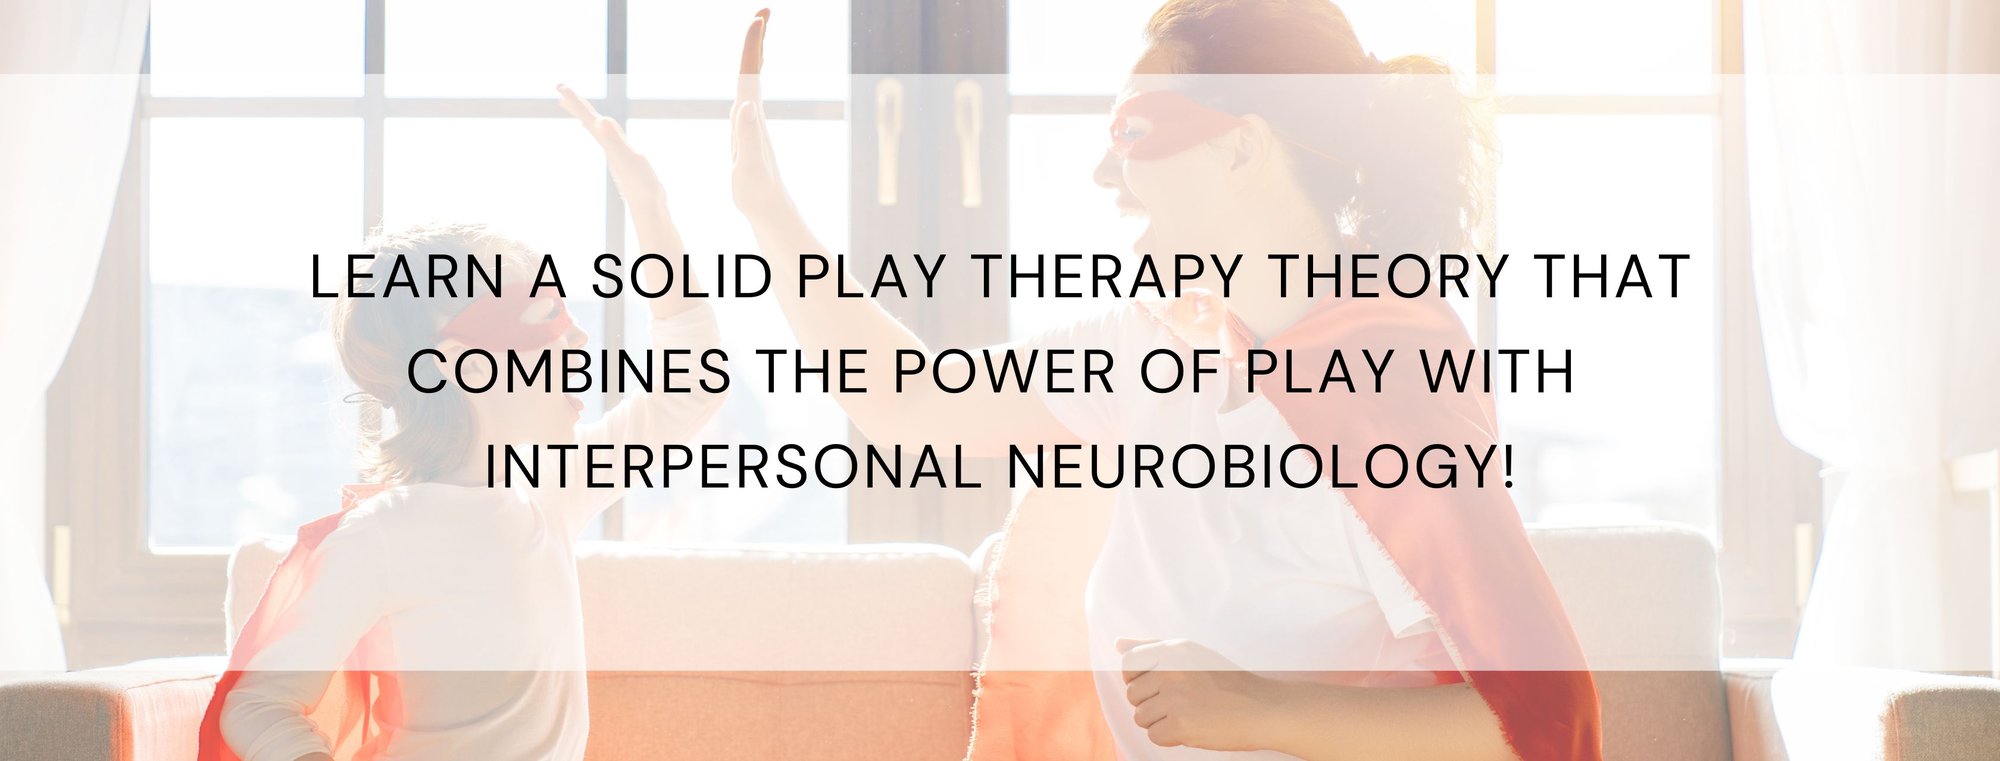 A solid play therapy approach